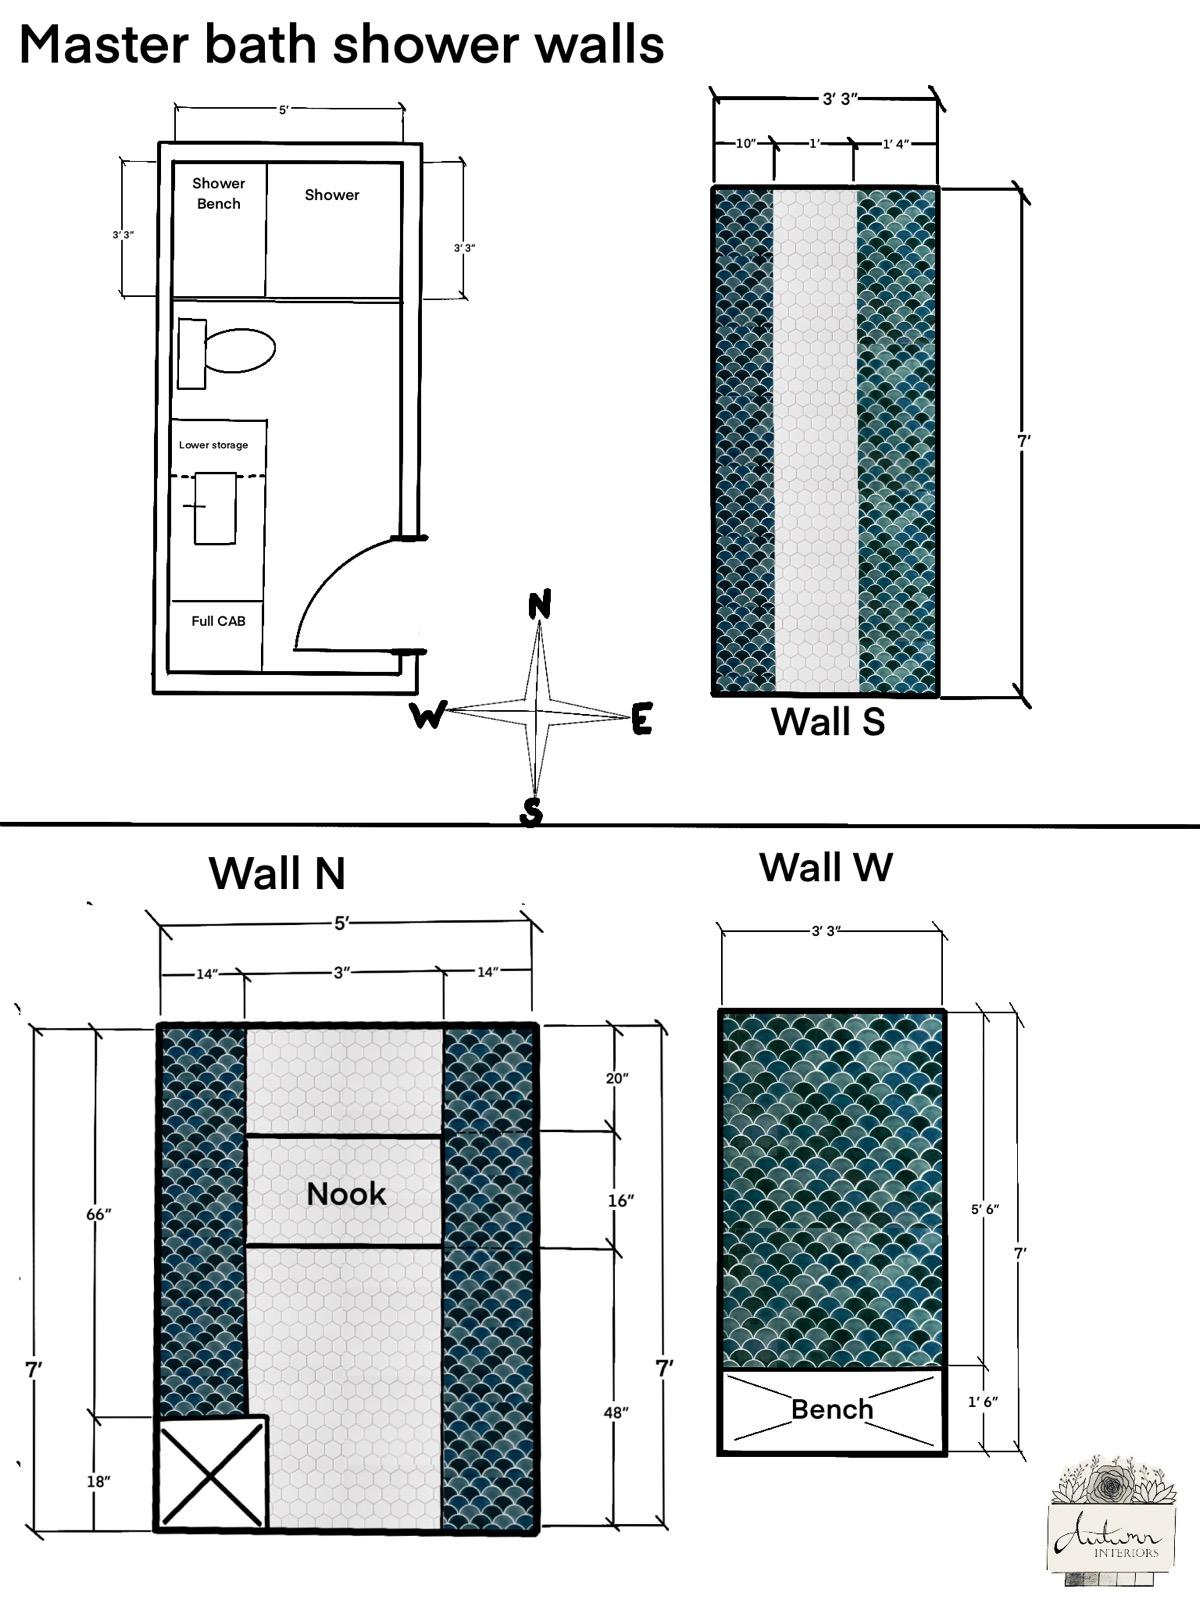 The master shower tile design originally included fish-scale-shaped tiles and striped walls.